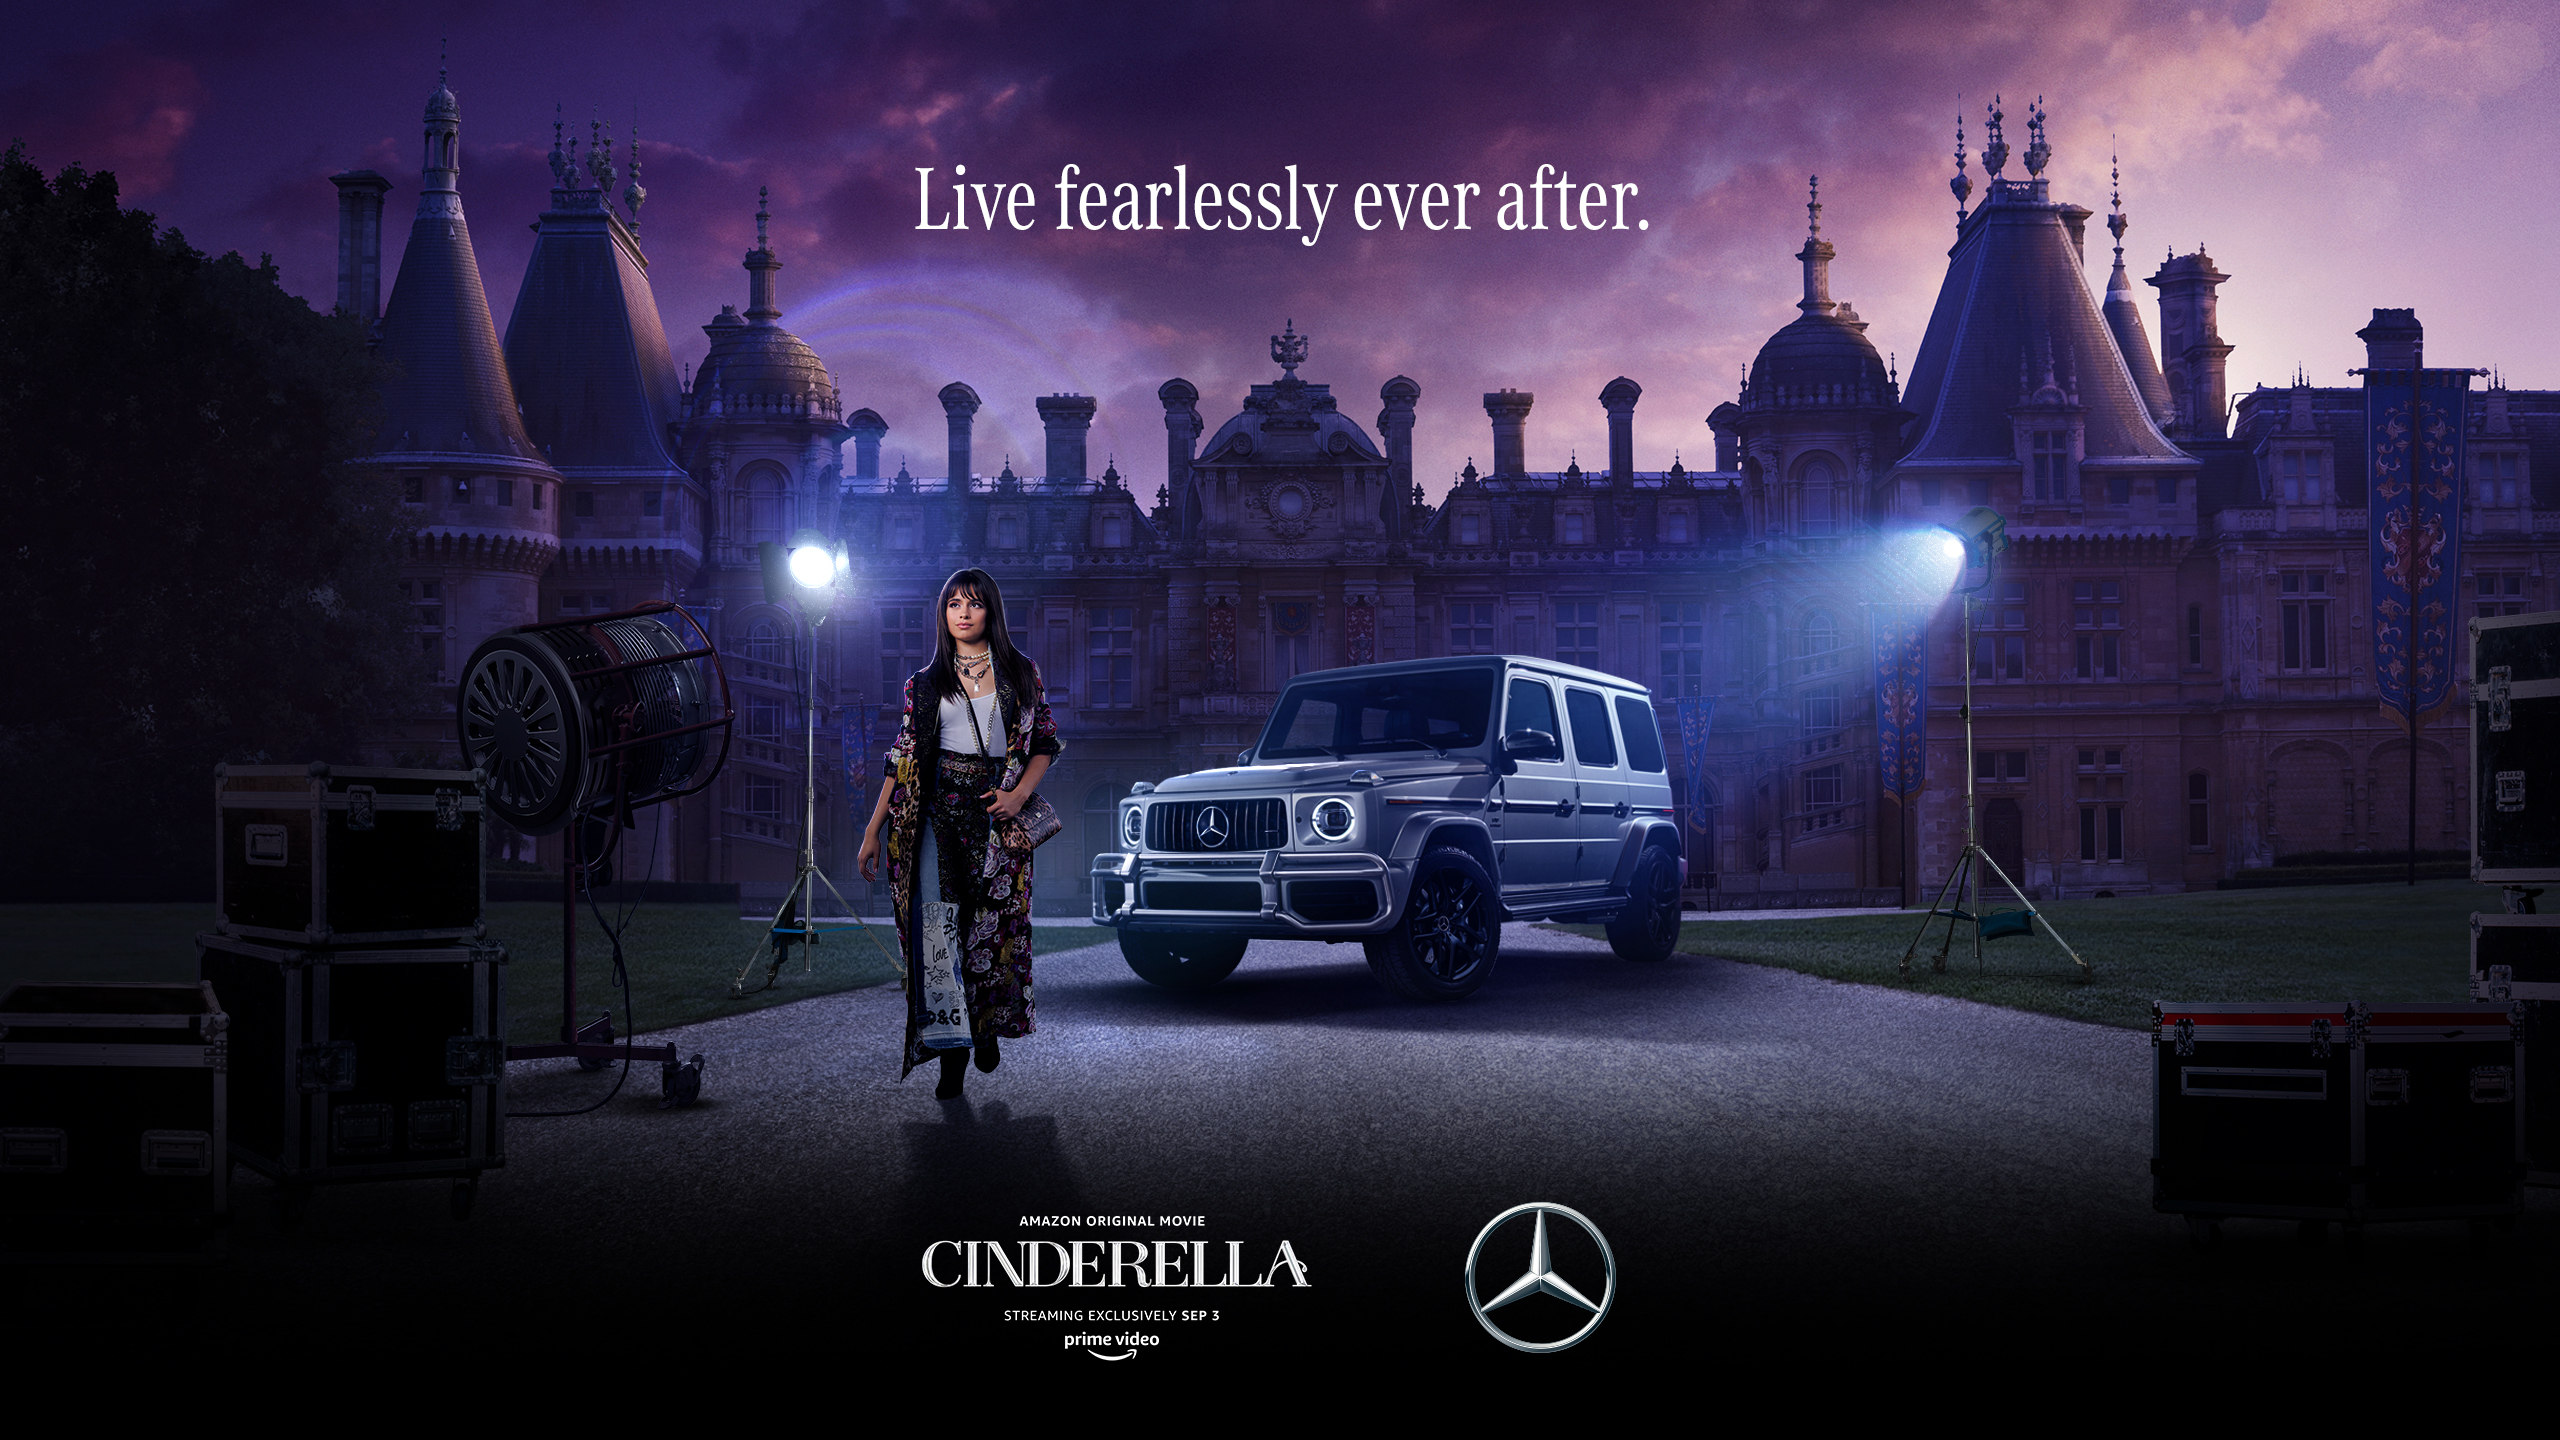 Mercedes Benz Joins With Amazon Prime Video On Cinderella Campaign To Celebrate And Inspire Individuals Business Wire